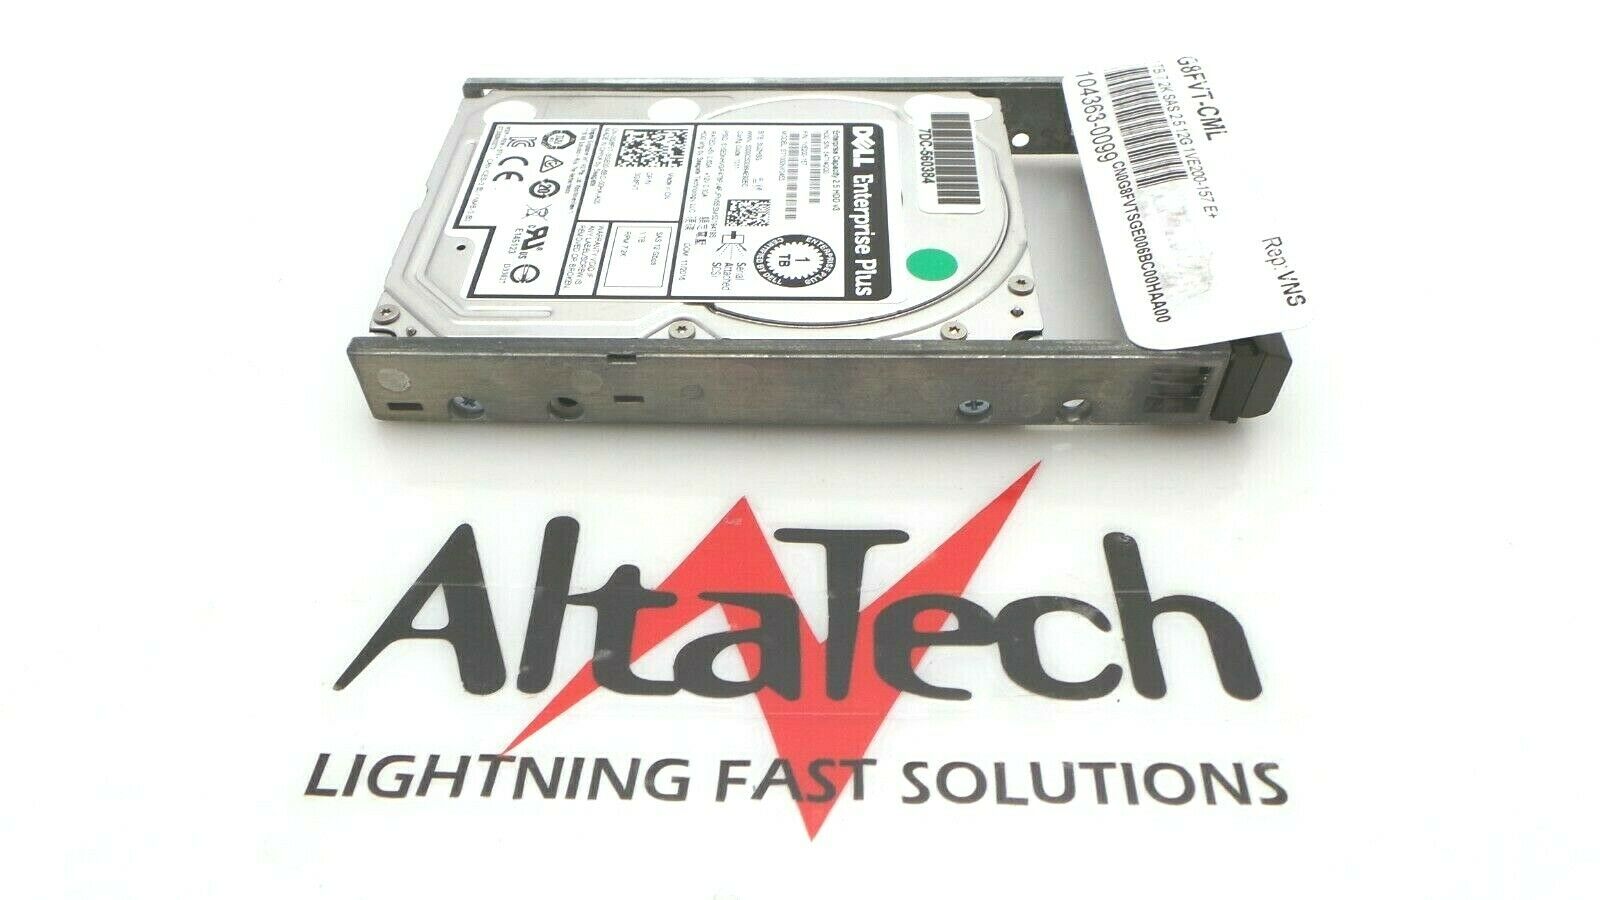 Seagate ST1000NX0453 Seagate ST1000NX0453 Compellent 900GB 7.2K SAS 2.5" 12G EP HDD Dell 1VE200-157 Hard Drive, Used